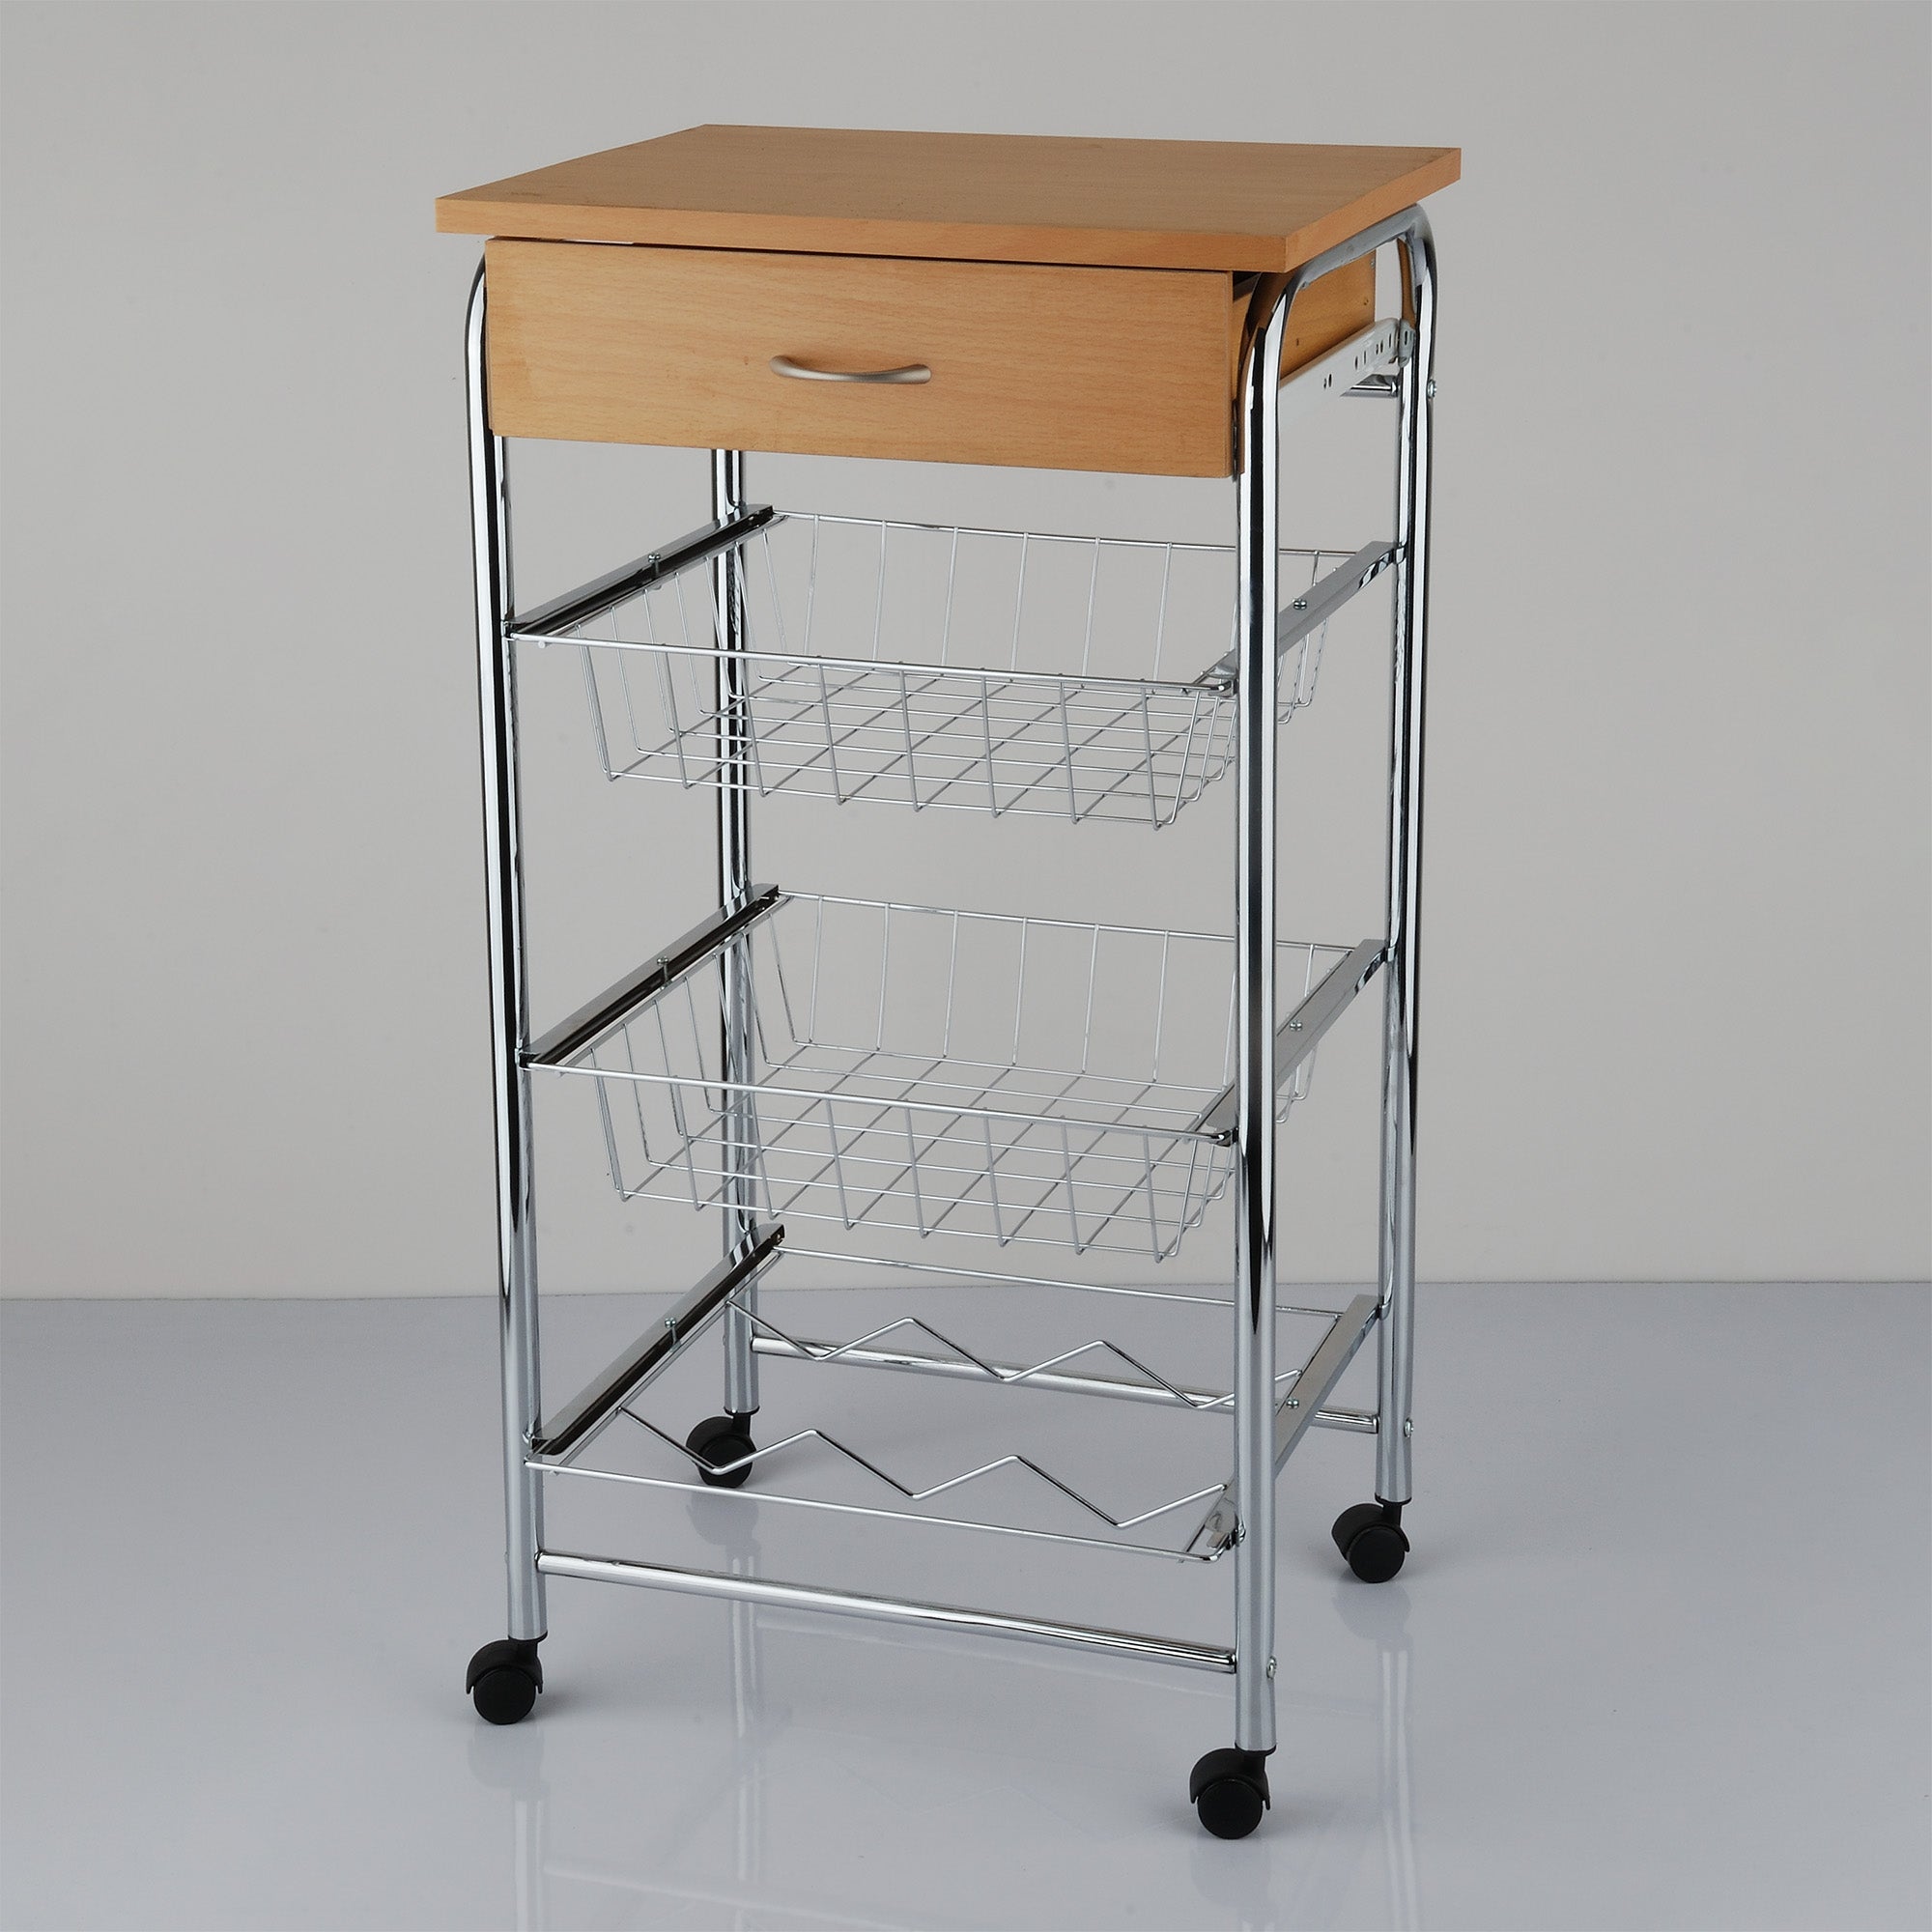 4-Tier Storage Rack with wheels, AN-40-106C